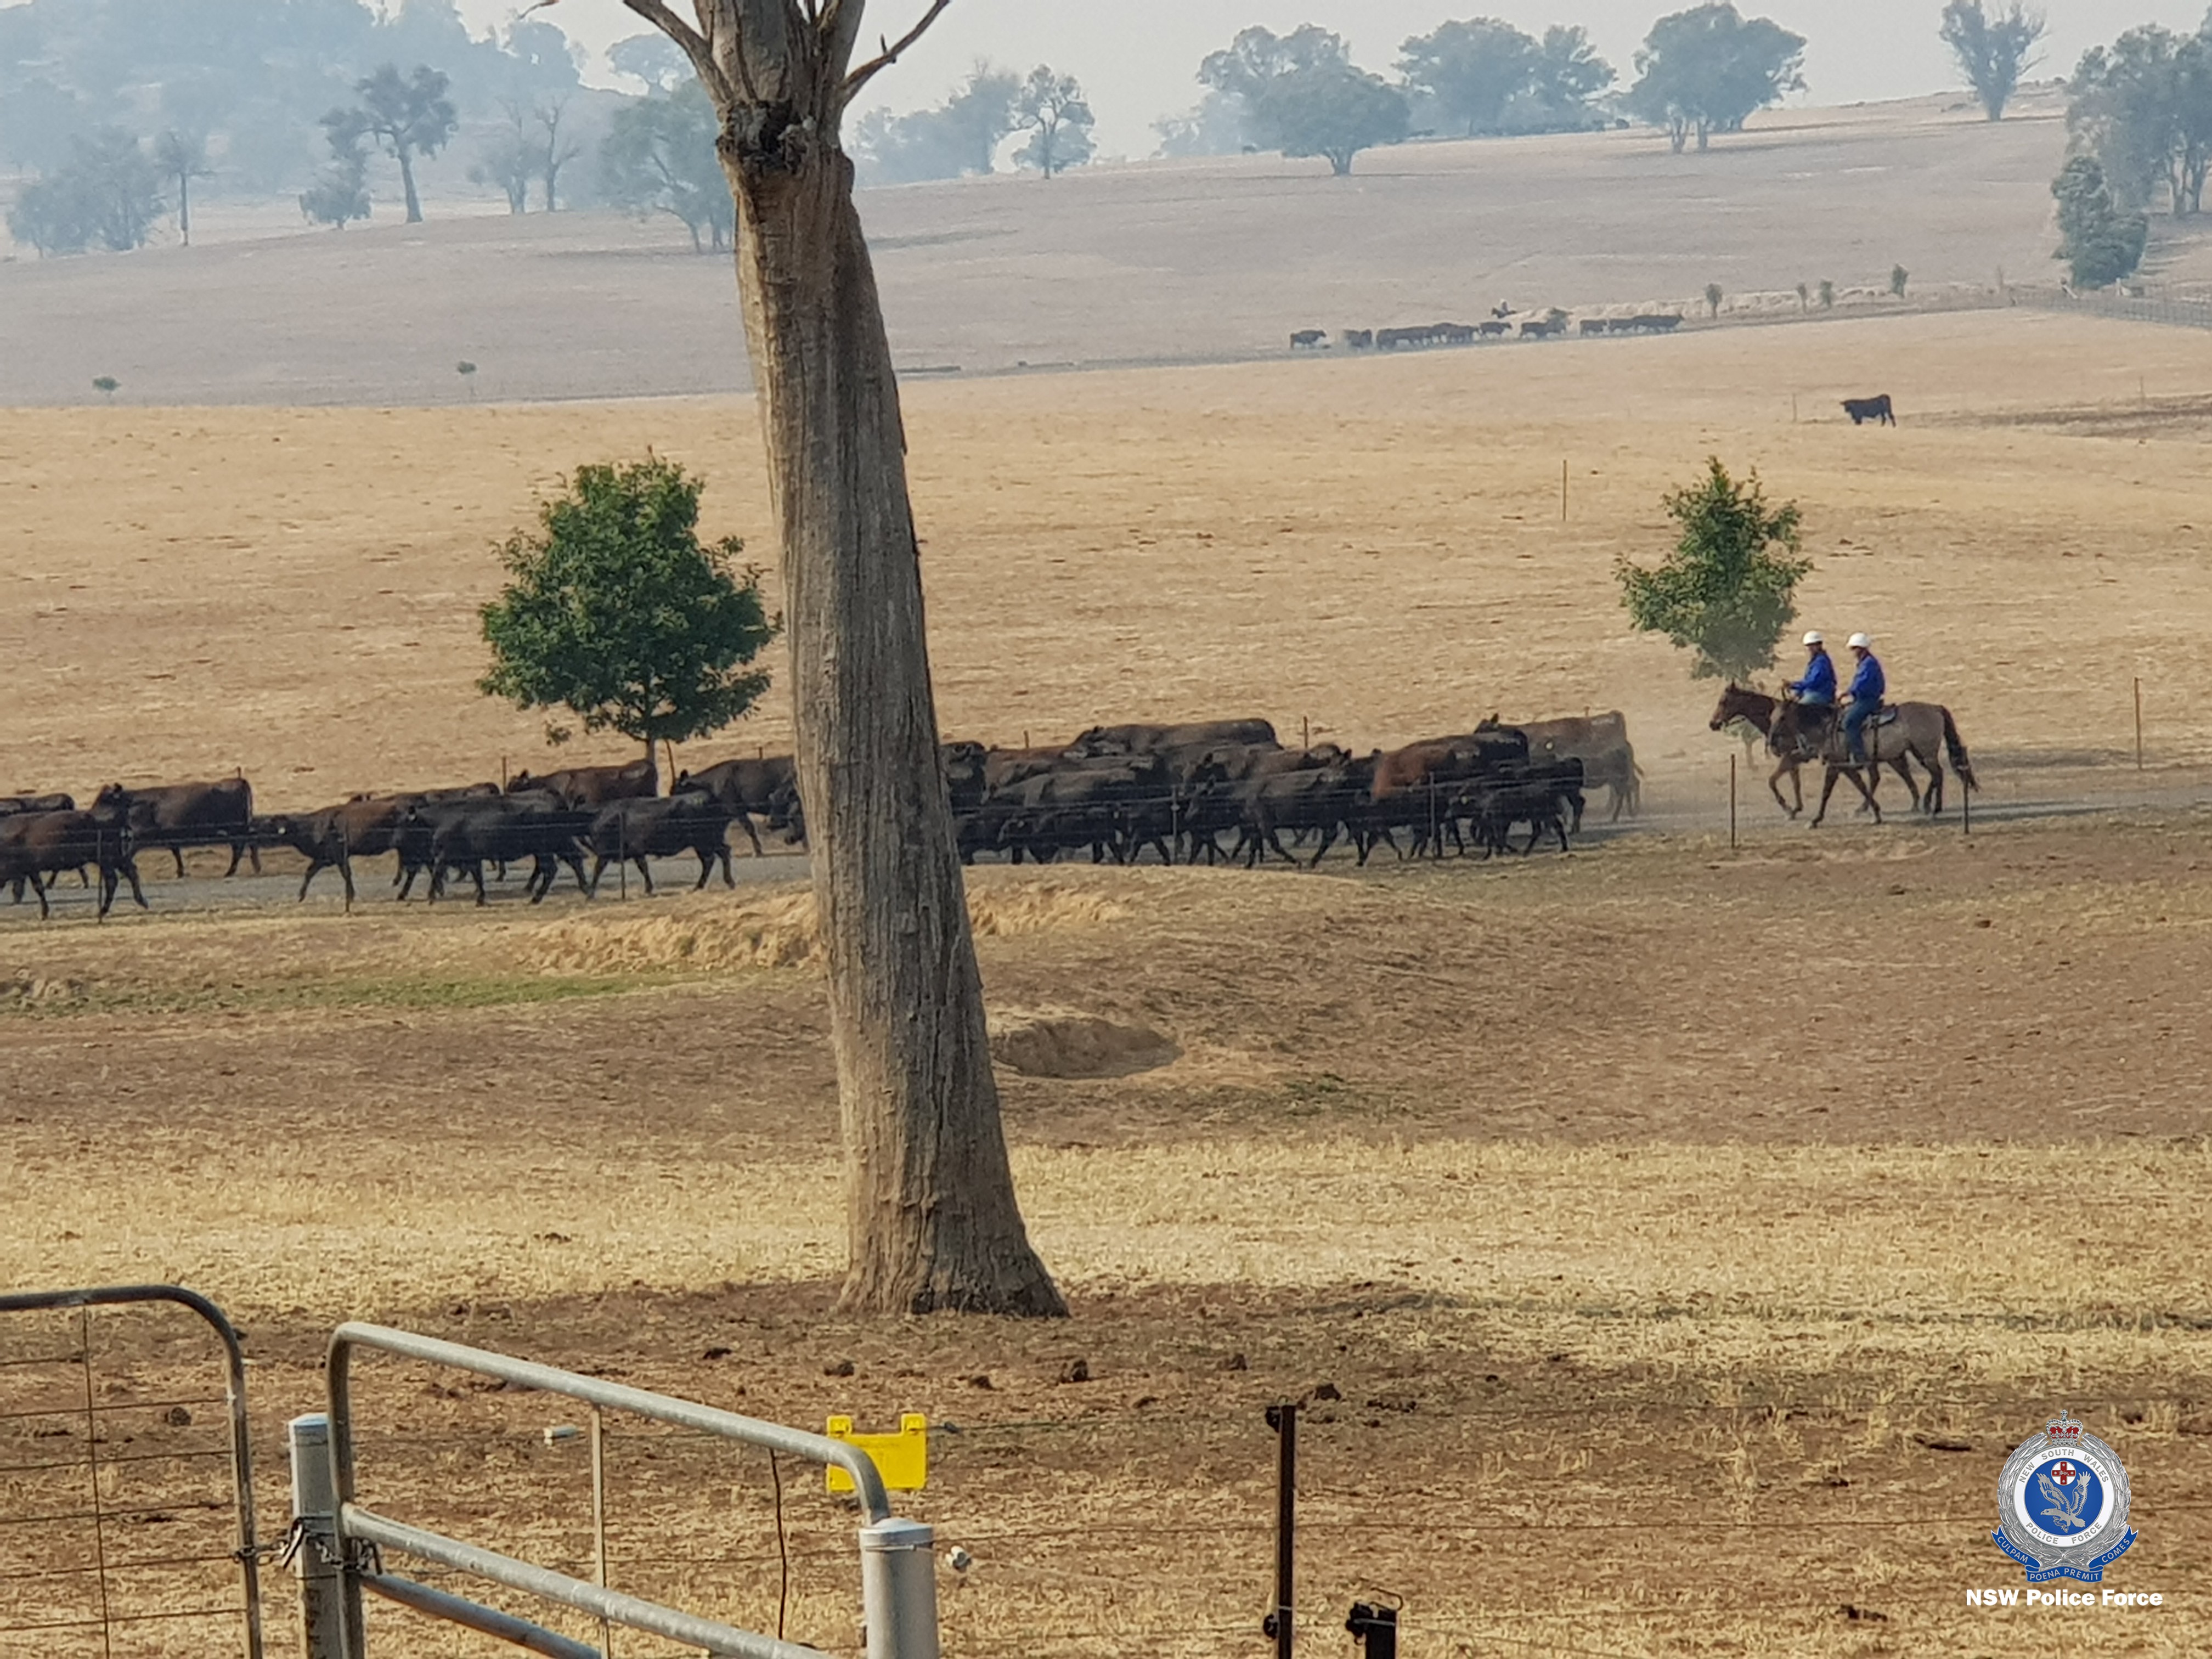 Sale of dead cows: Riverina man charged over multi-million dollar cattle fraud